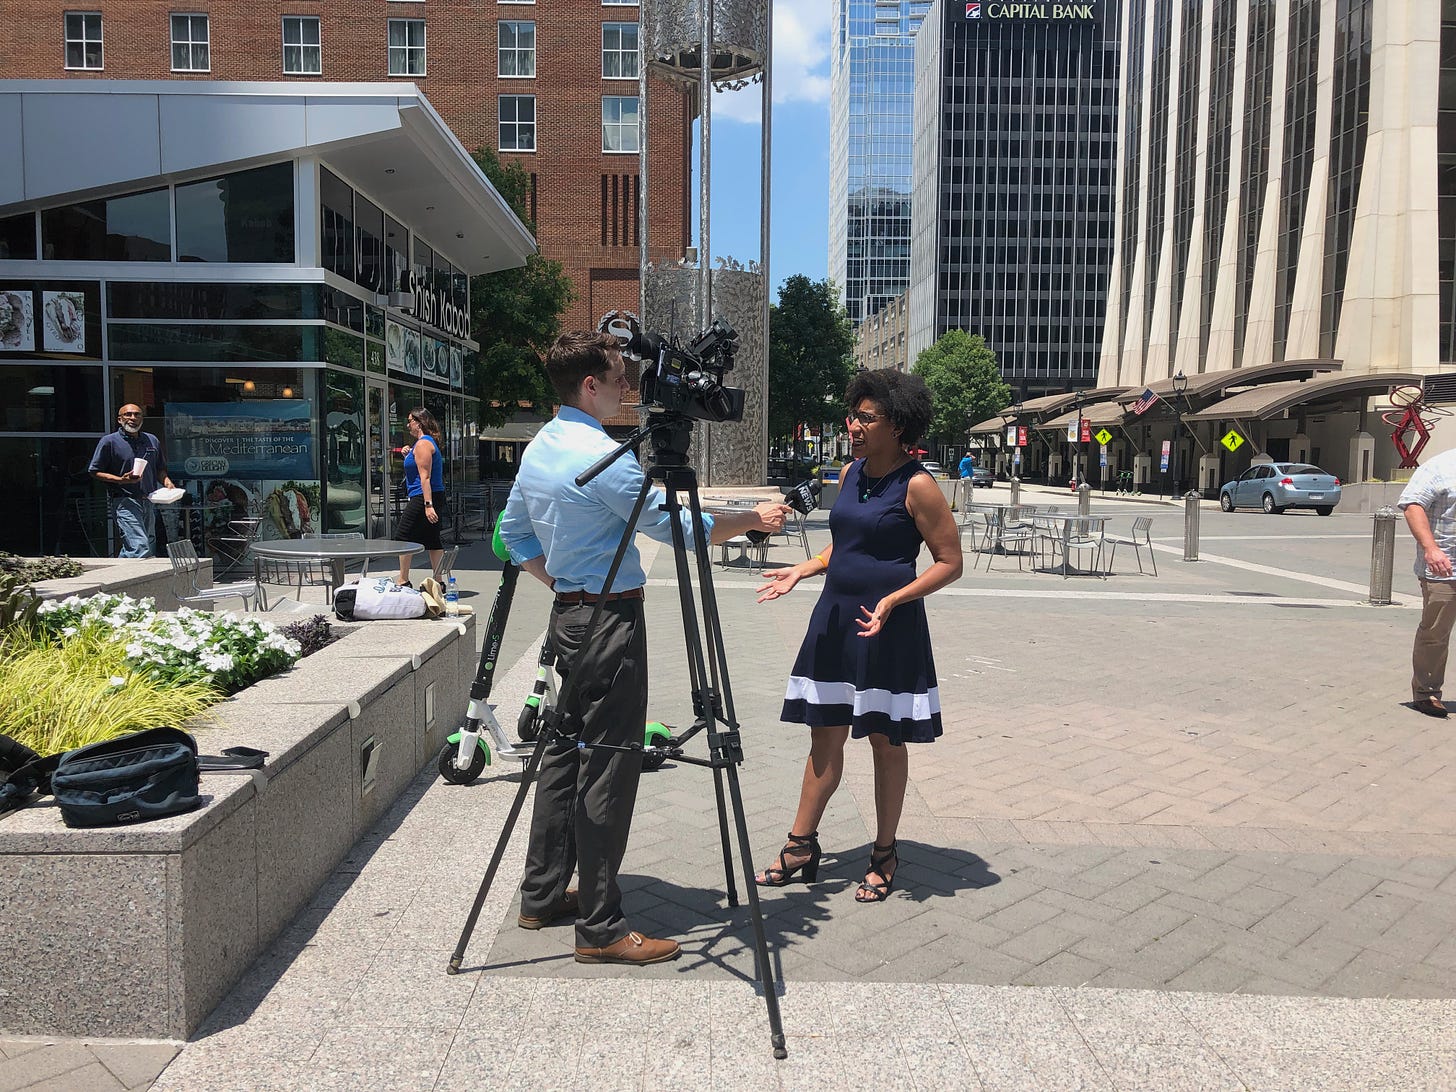 Kristen is wearing a blue dress with a white stripe and she's standing next to a reporter in a blue shirt and green kakhis and their camera on the Fayetteville Street Mall in Downtown Raleigh, NC in June of 2019